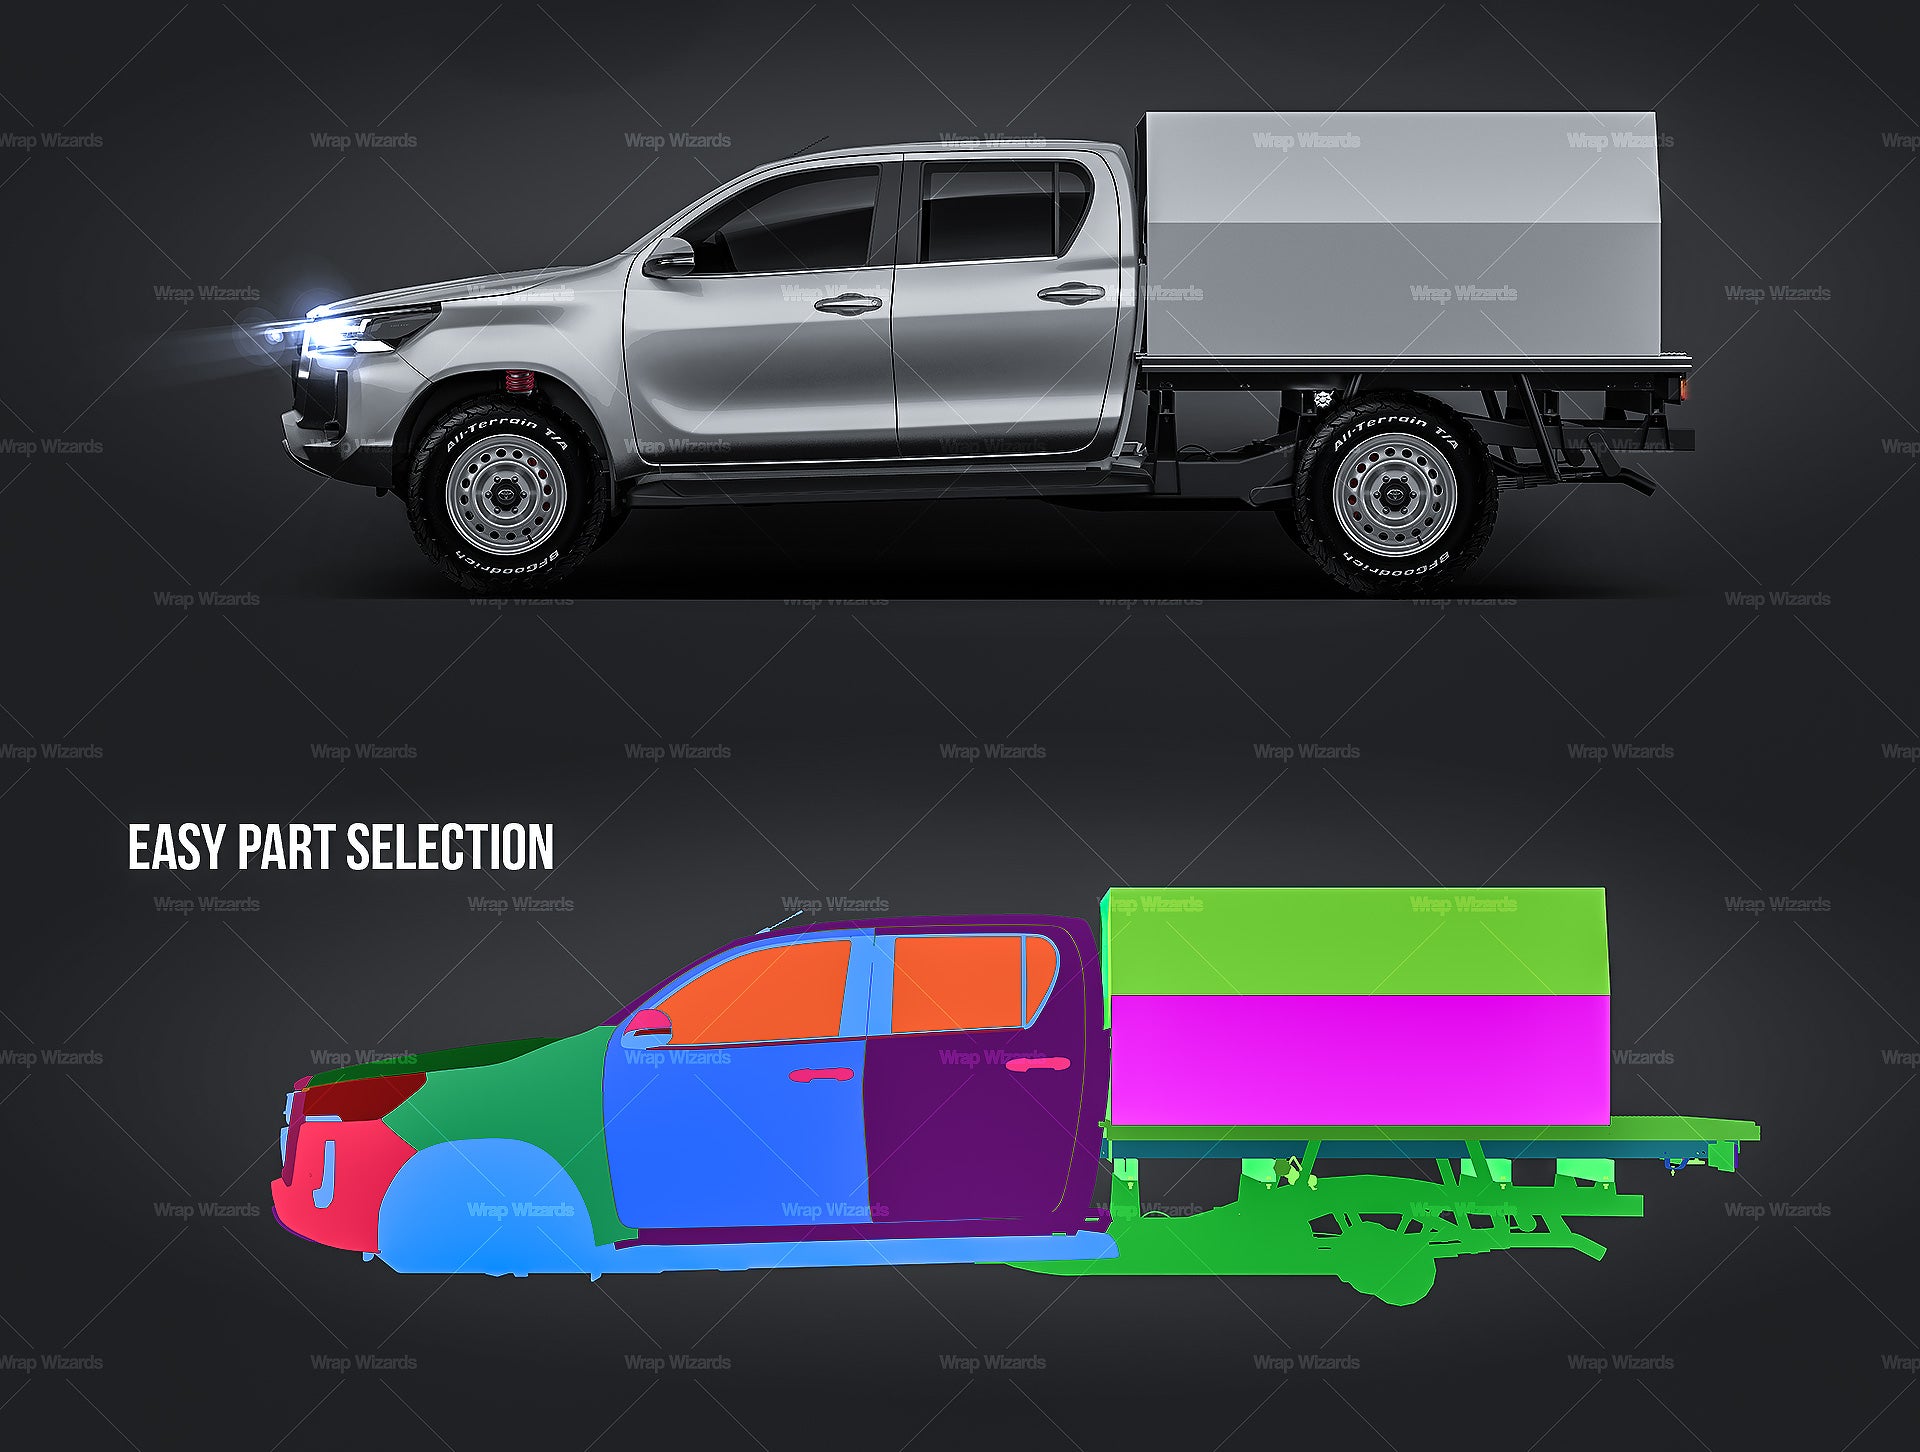 Toyota Hilux 2021 Double Cab Alloy Tray with UTE toolbox glossy finish - all sides Car Mockup Template.psd